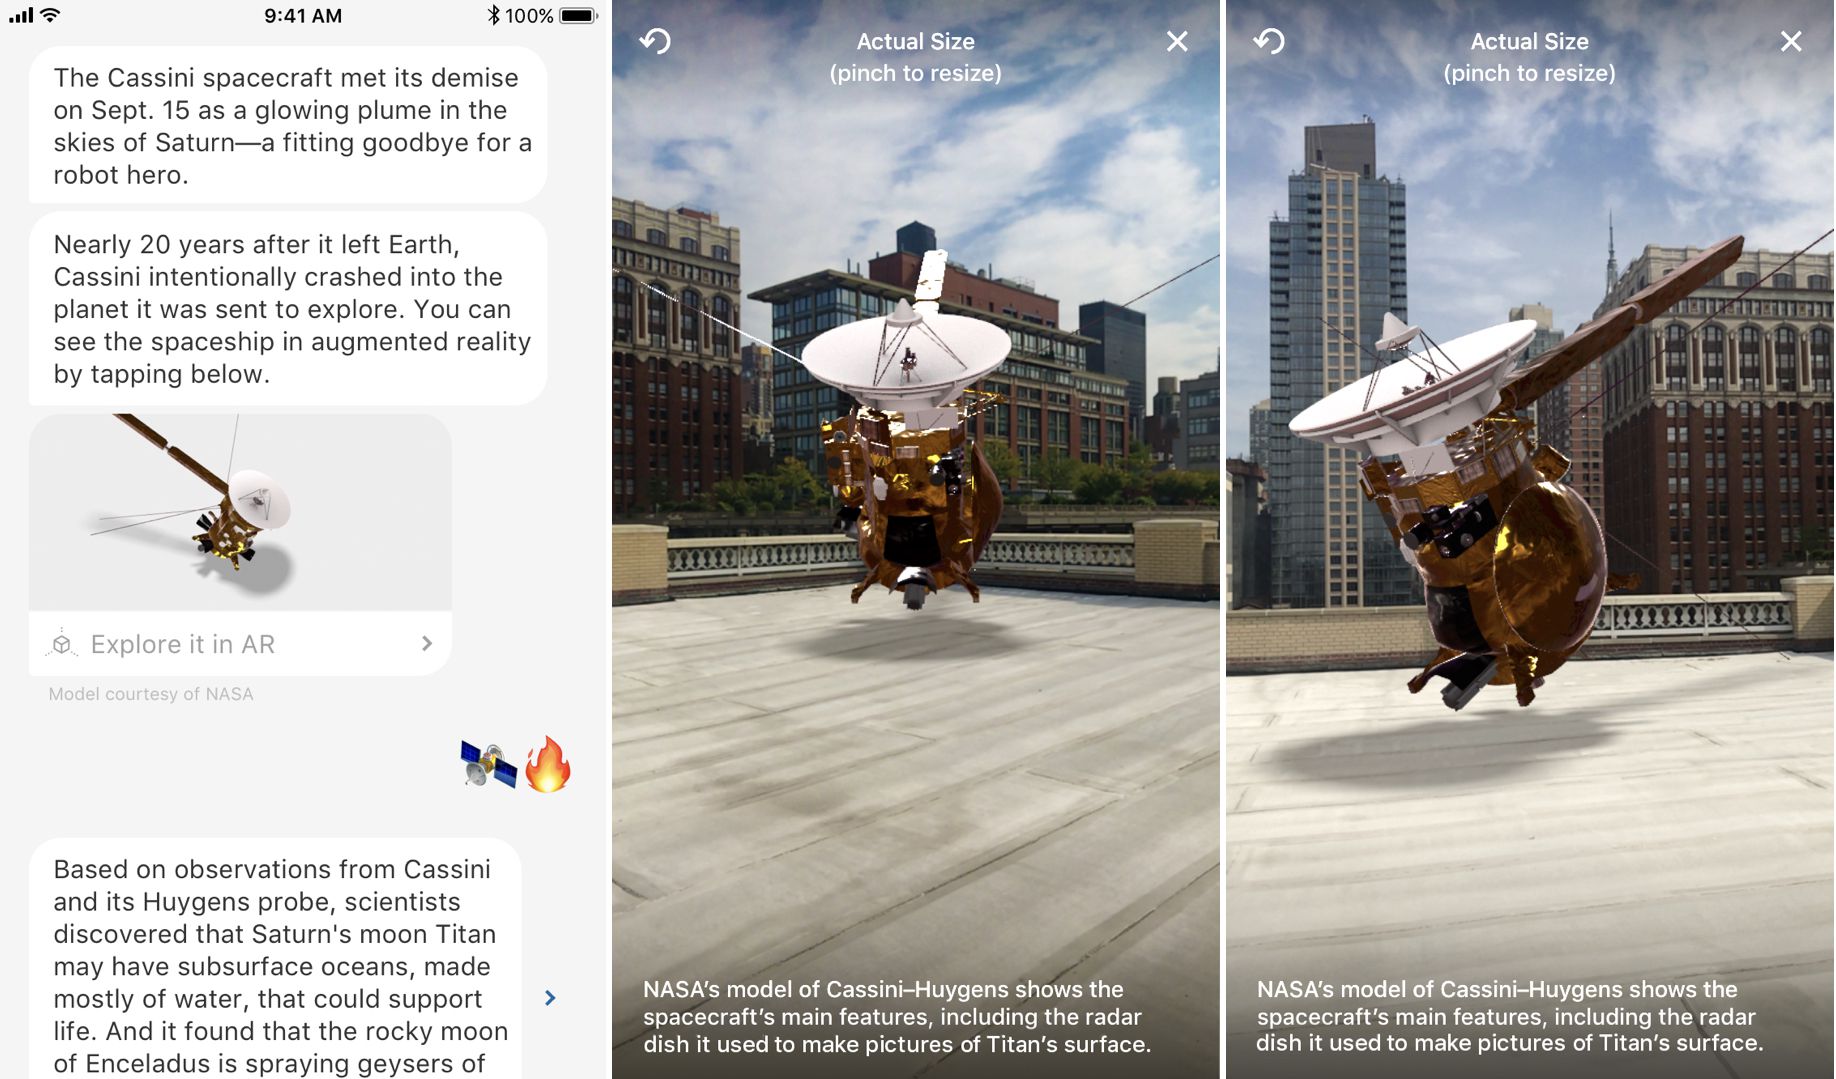 Augmented reality quietly augmenting mainstream news